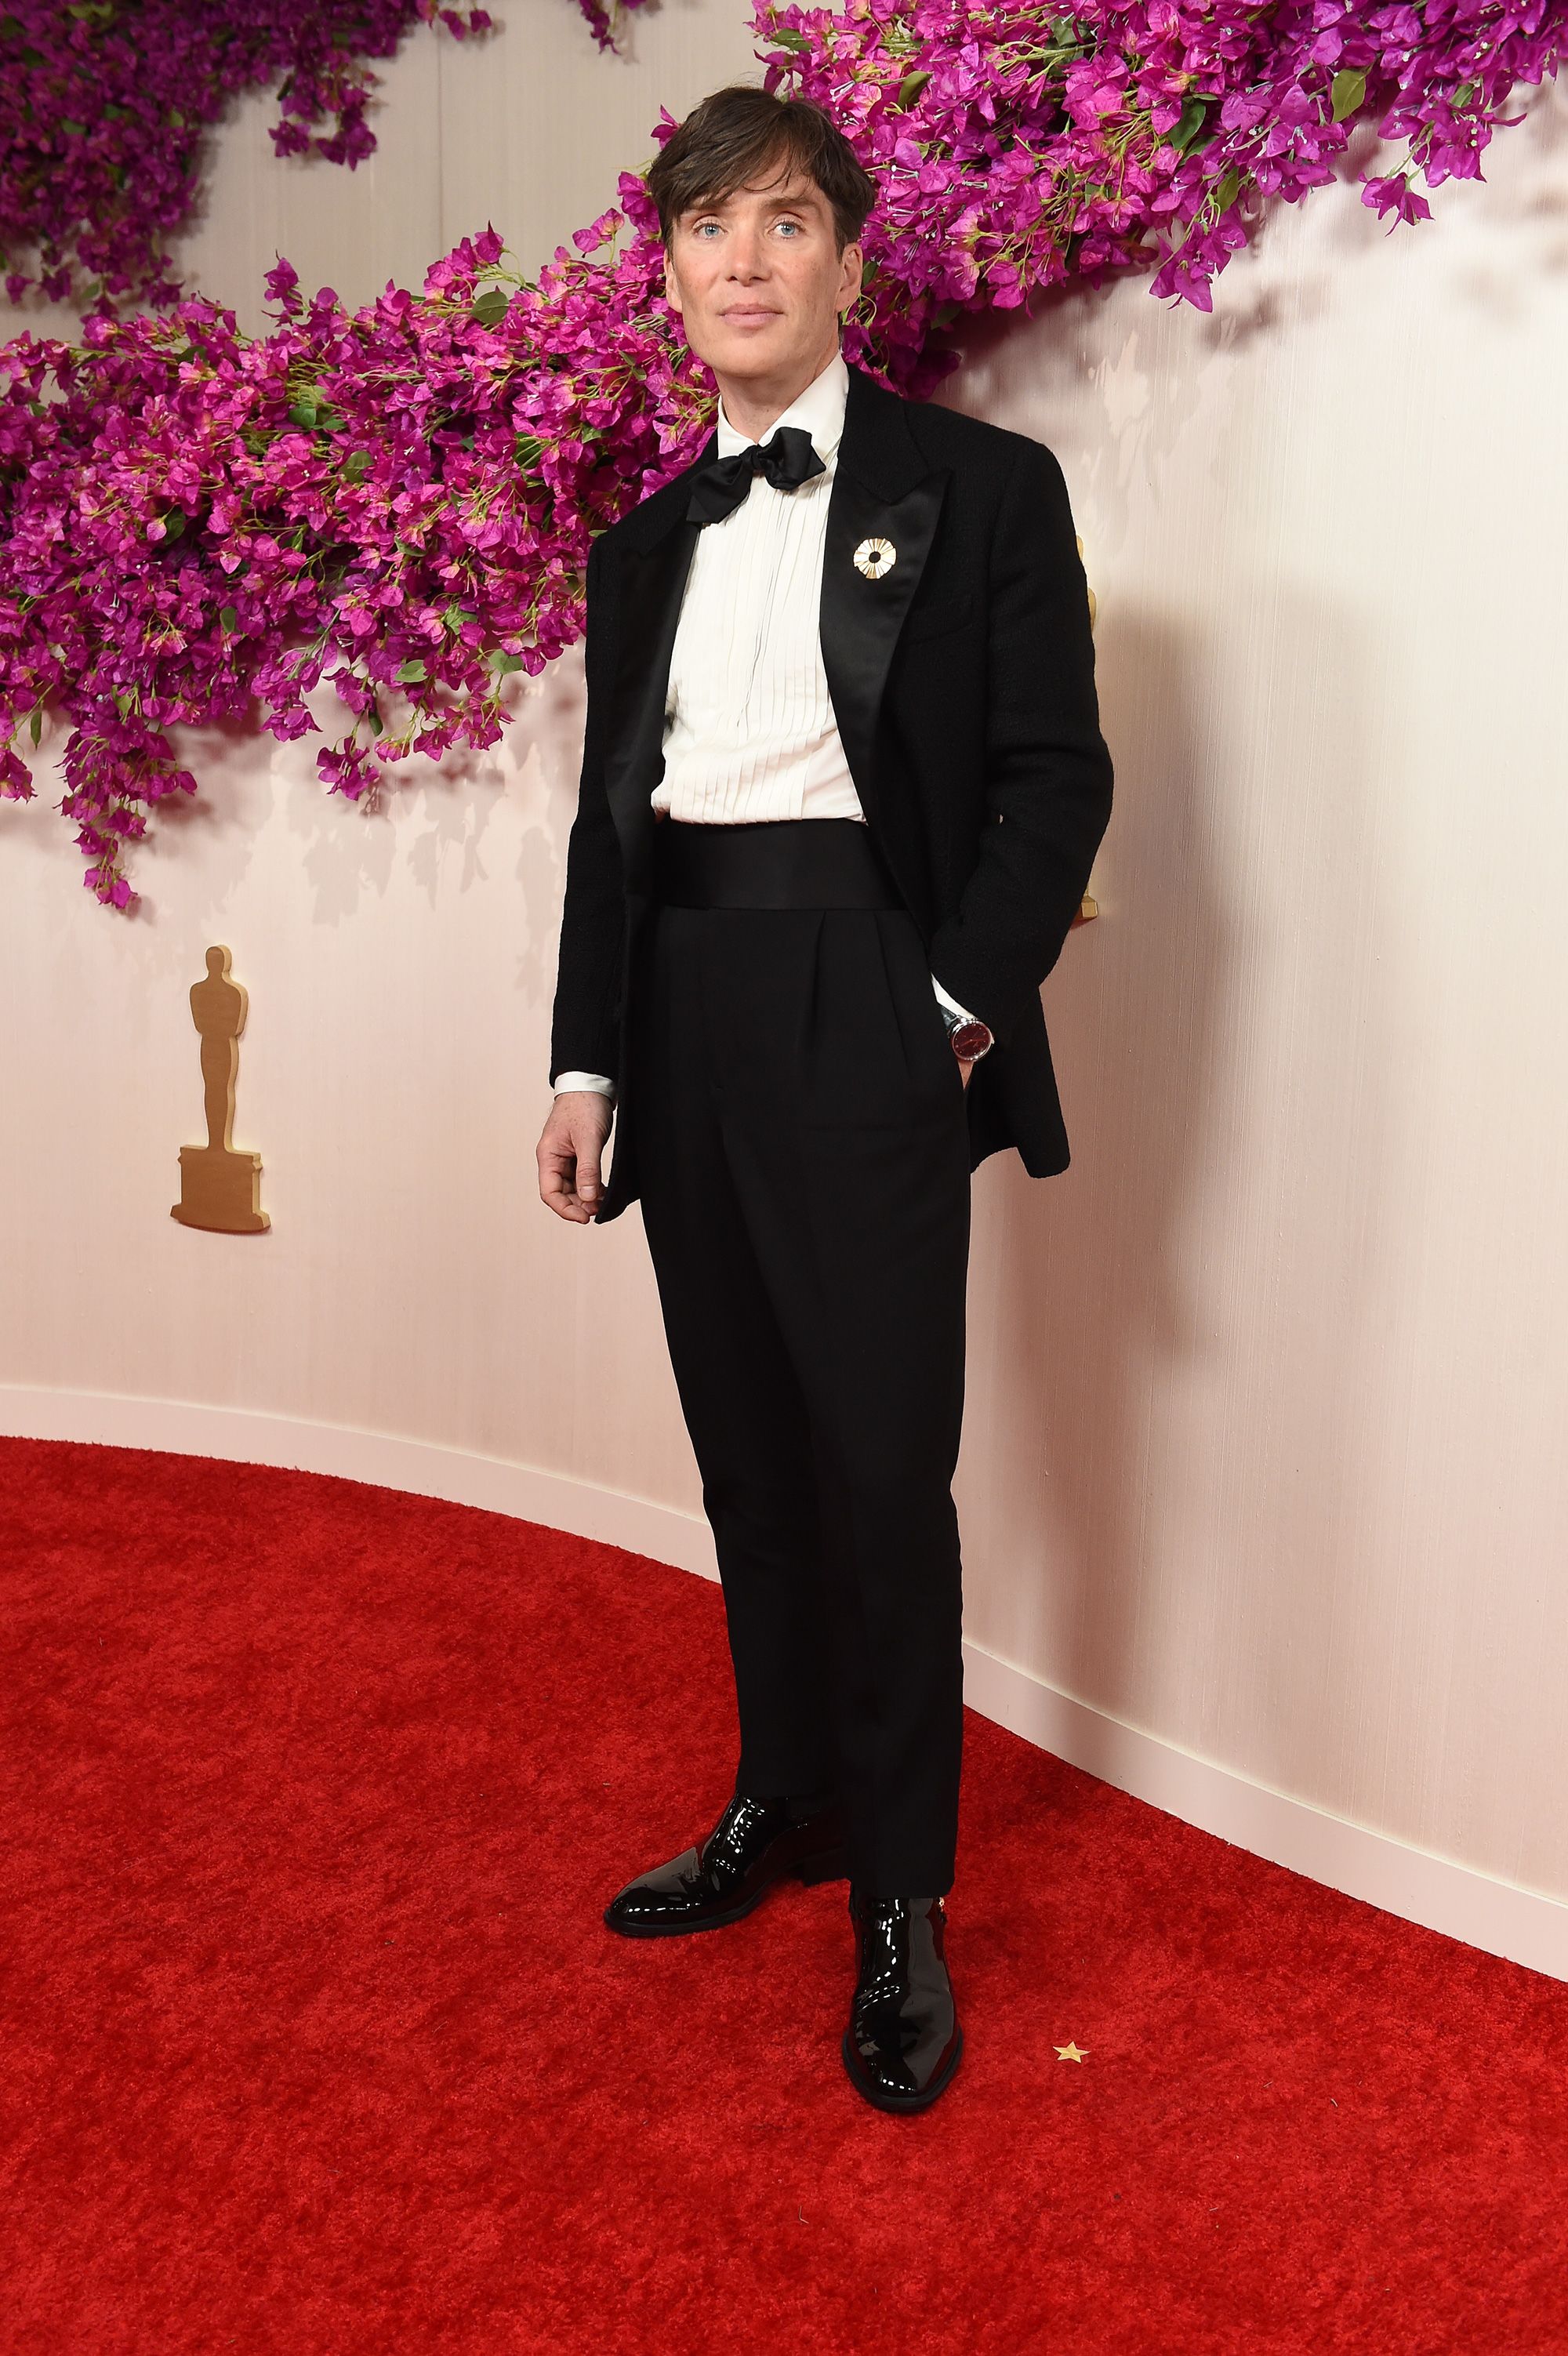 Cillian Murphy wore a custom Atelier Versace suit finished with a gemstone brooch designed by Hong Kong-based designer Bertrand Mak's jewelry brand Sauvereign.